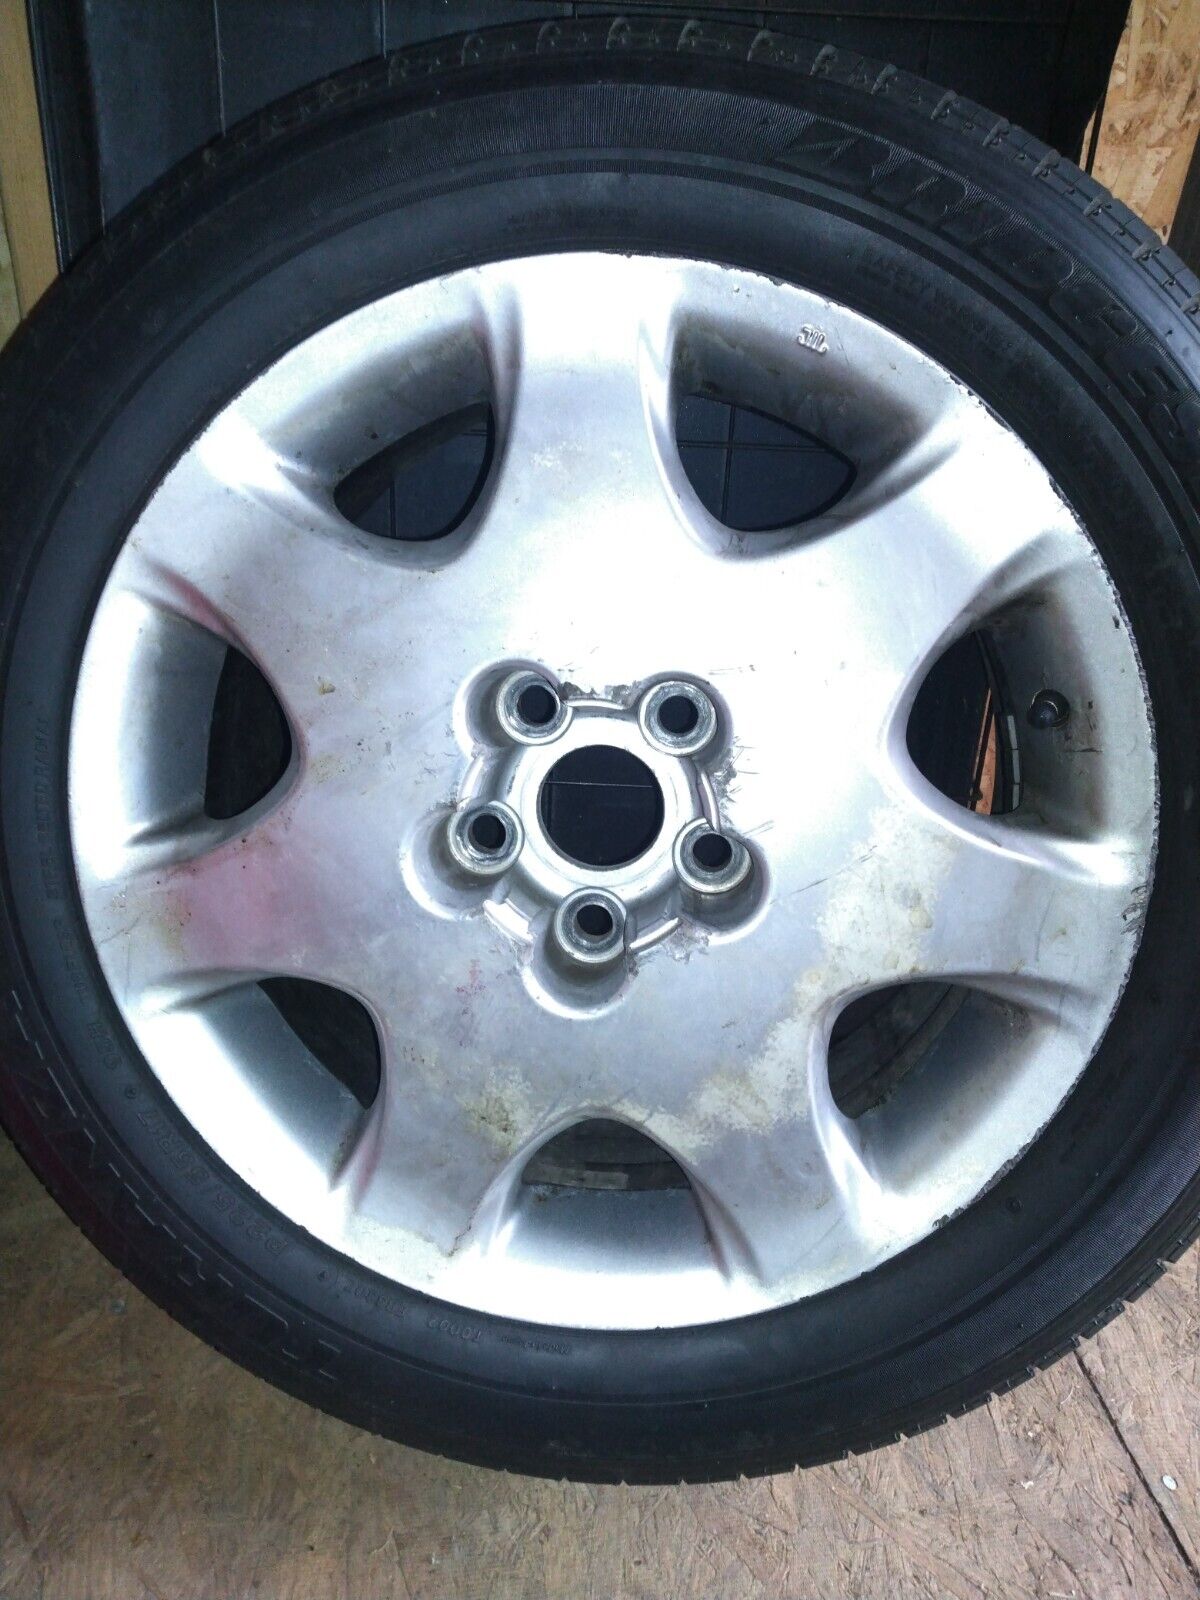 2001 Lexus is430 rim w/NEW TIRE included  